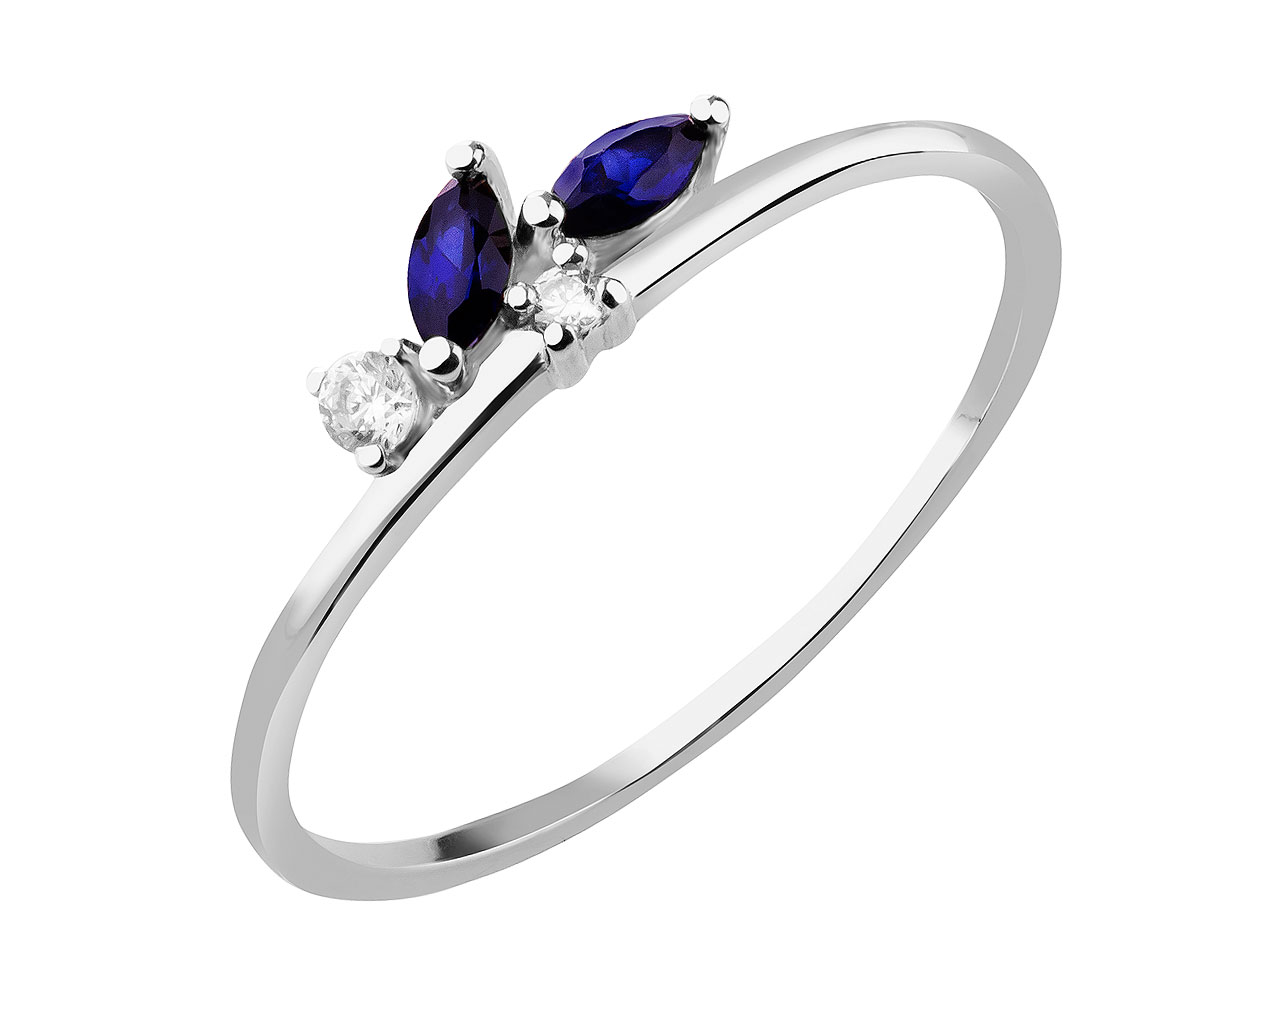 585 Rhodium-Plated White Gold Ring with Sapphire